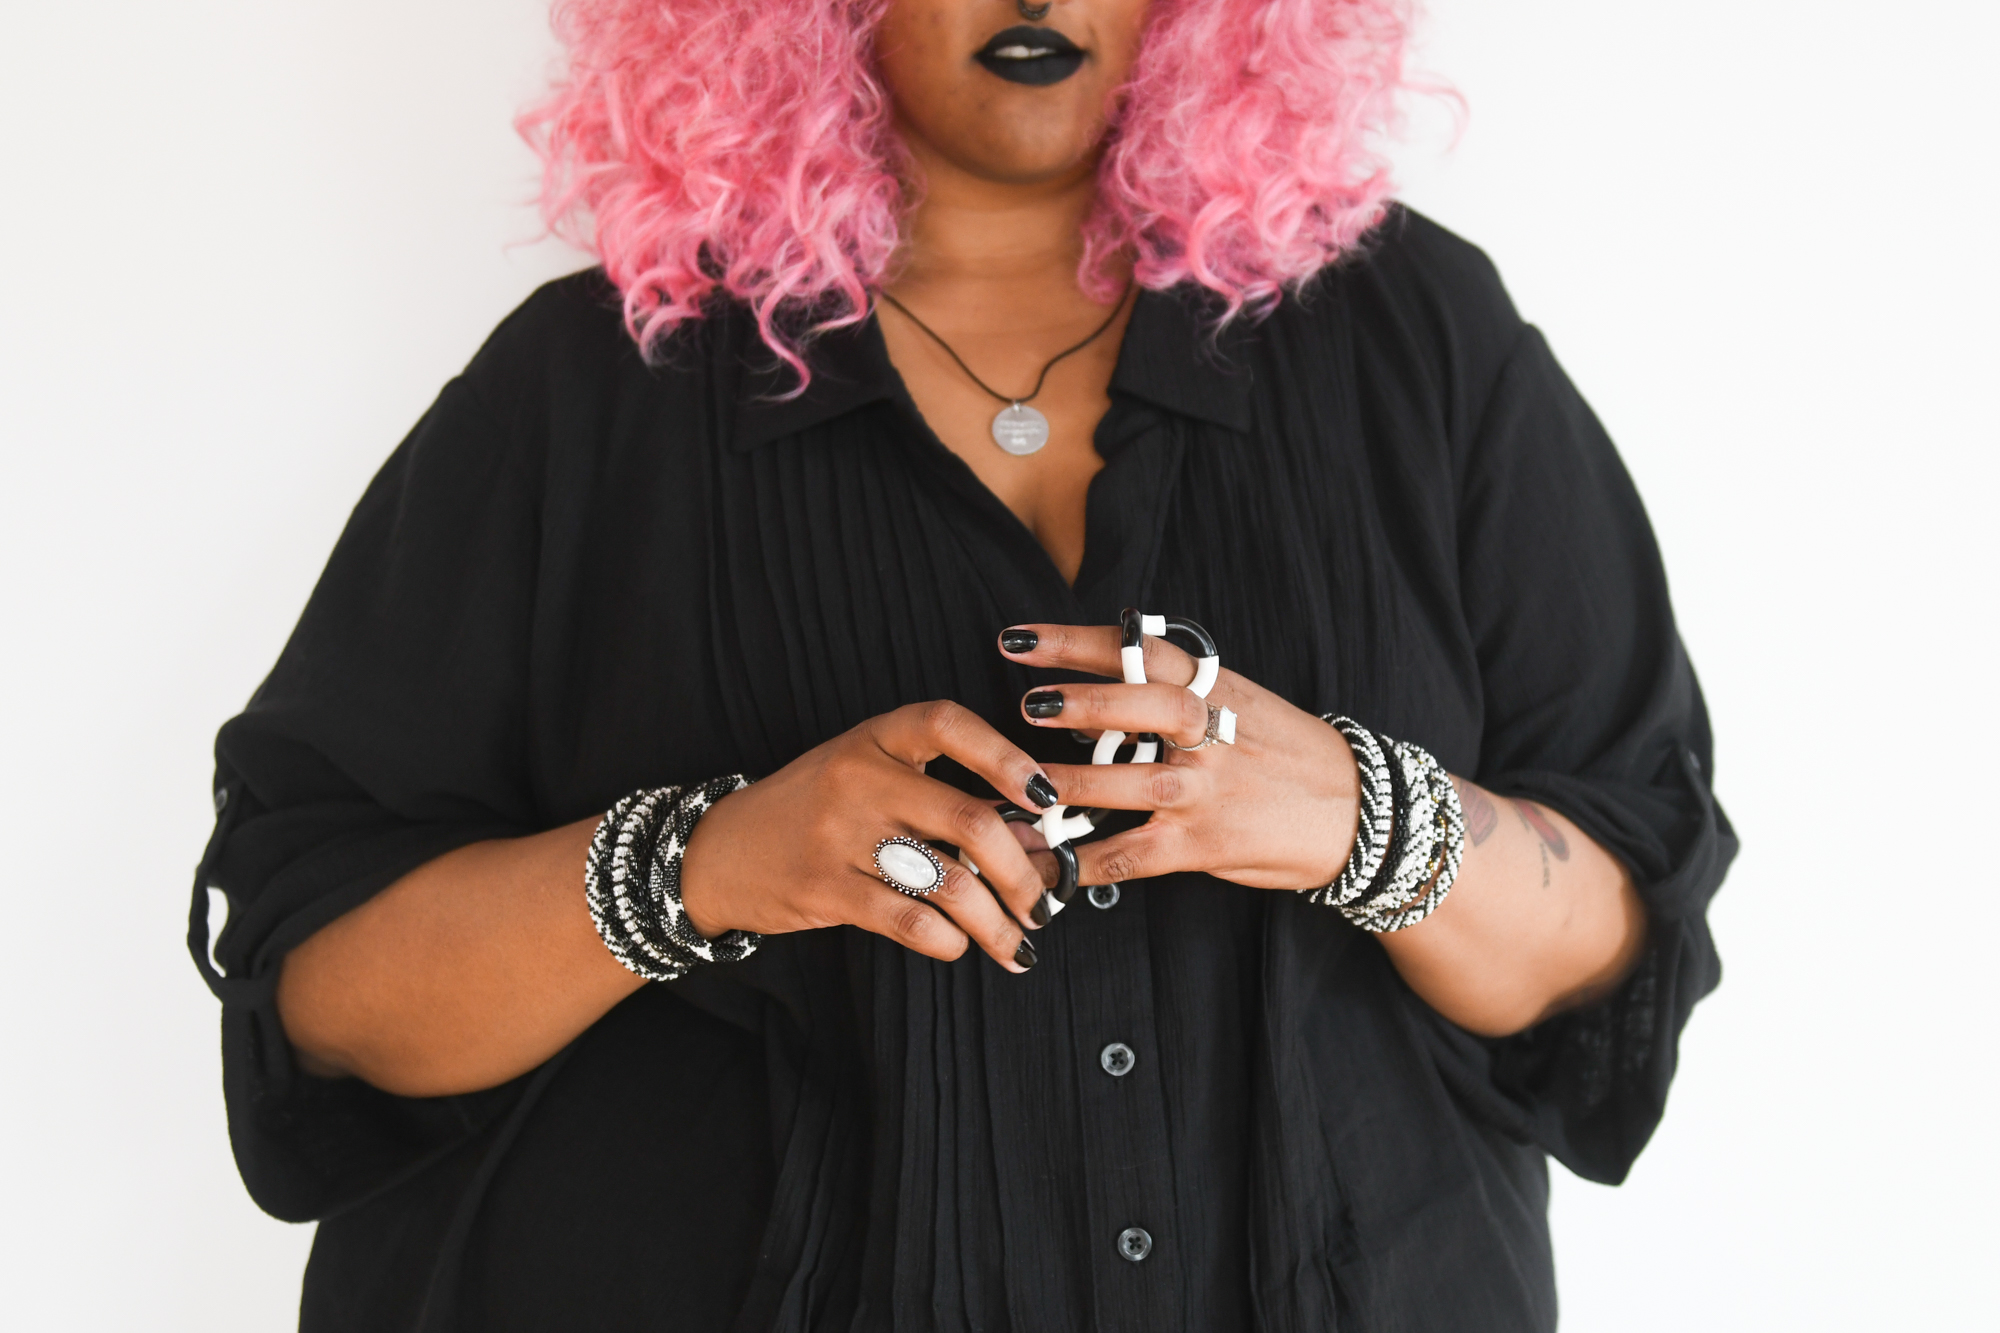 An African American teen with pink hair wears multiple bracelets.